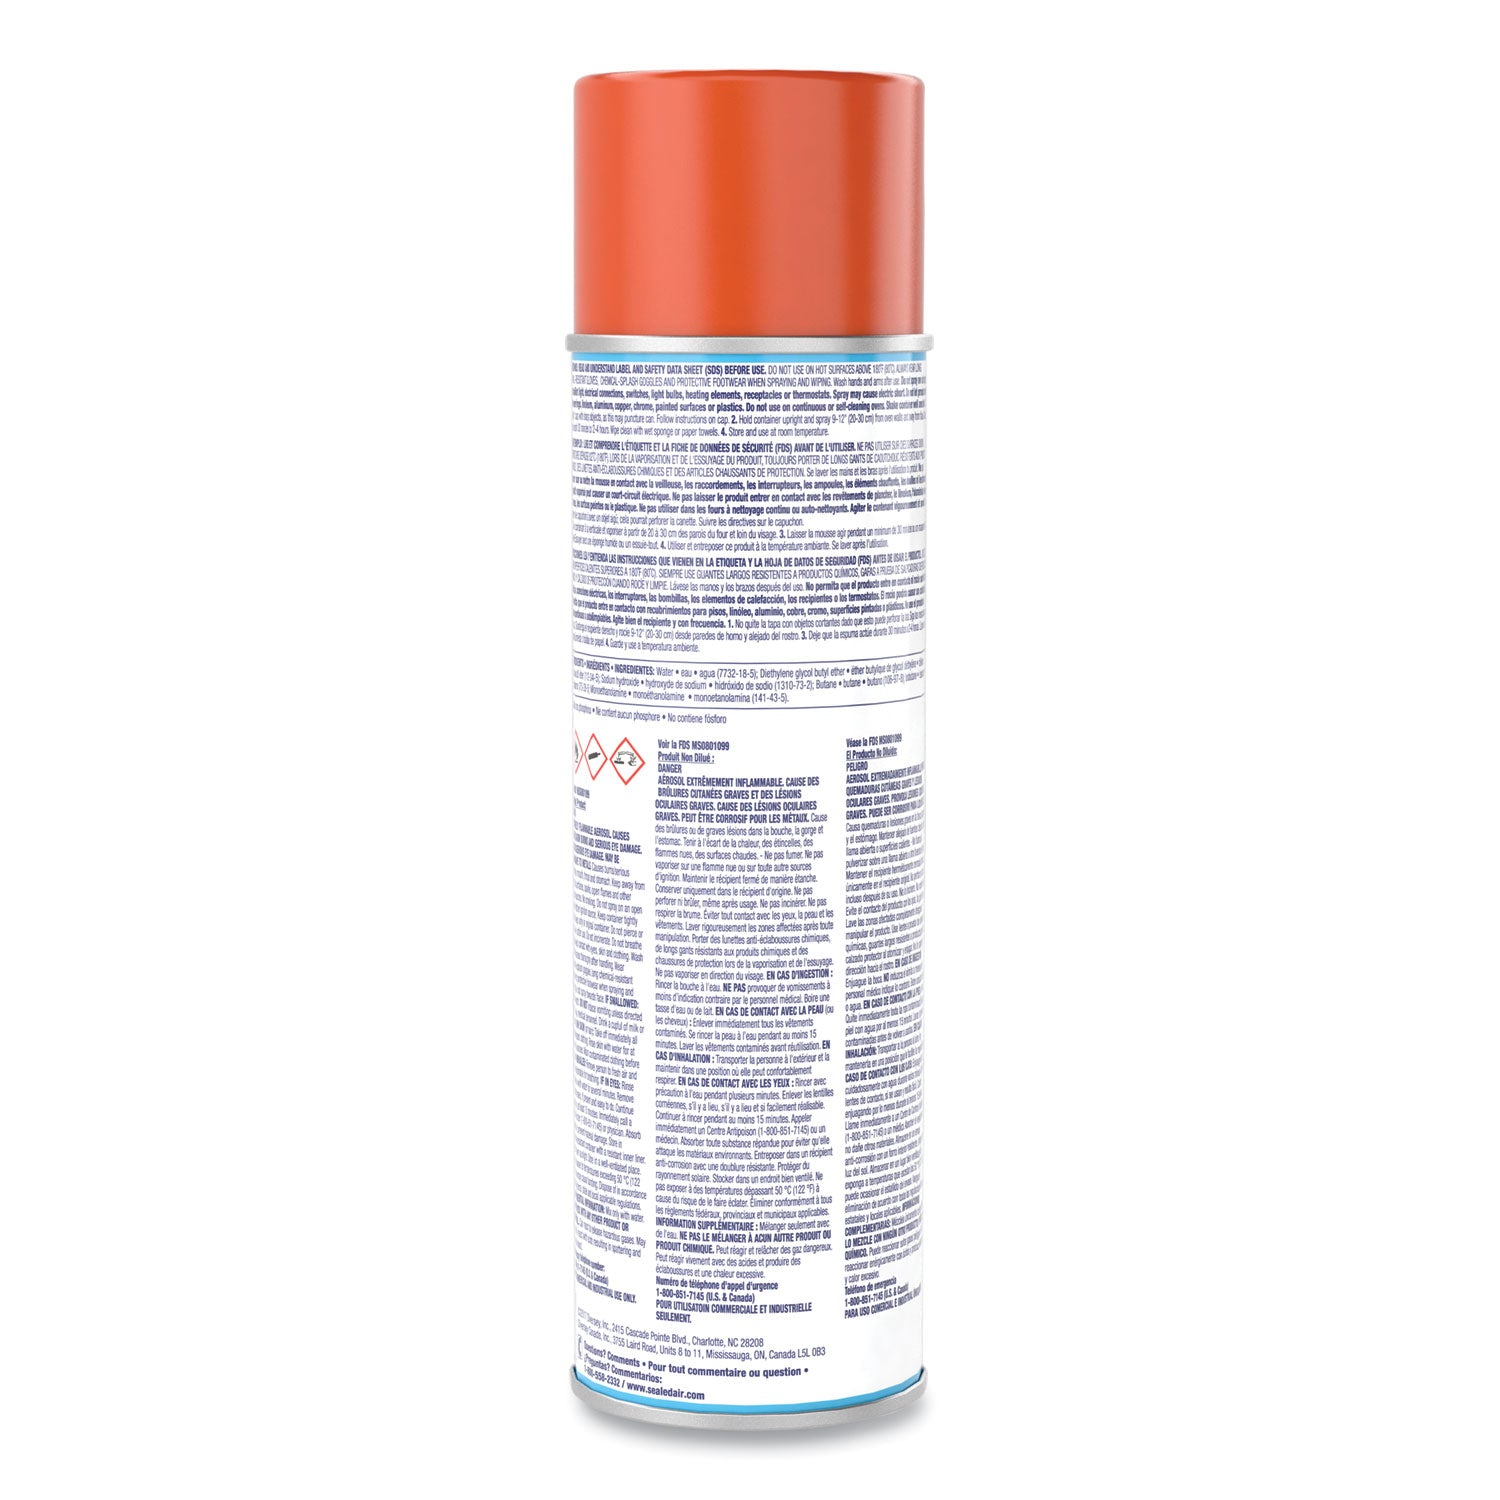 oven-and-grill-cleaner-ready-to-use-19-oz-aerosol-spray_dvocbd991206ea - 2